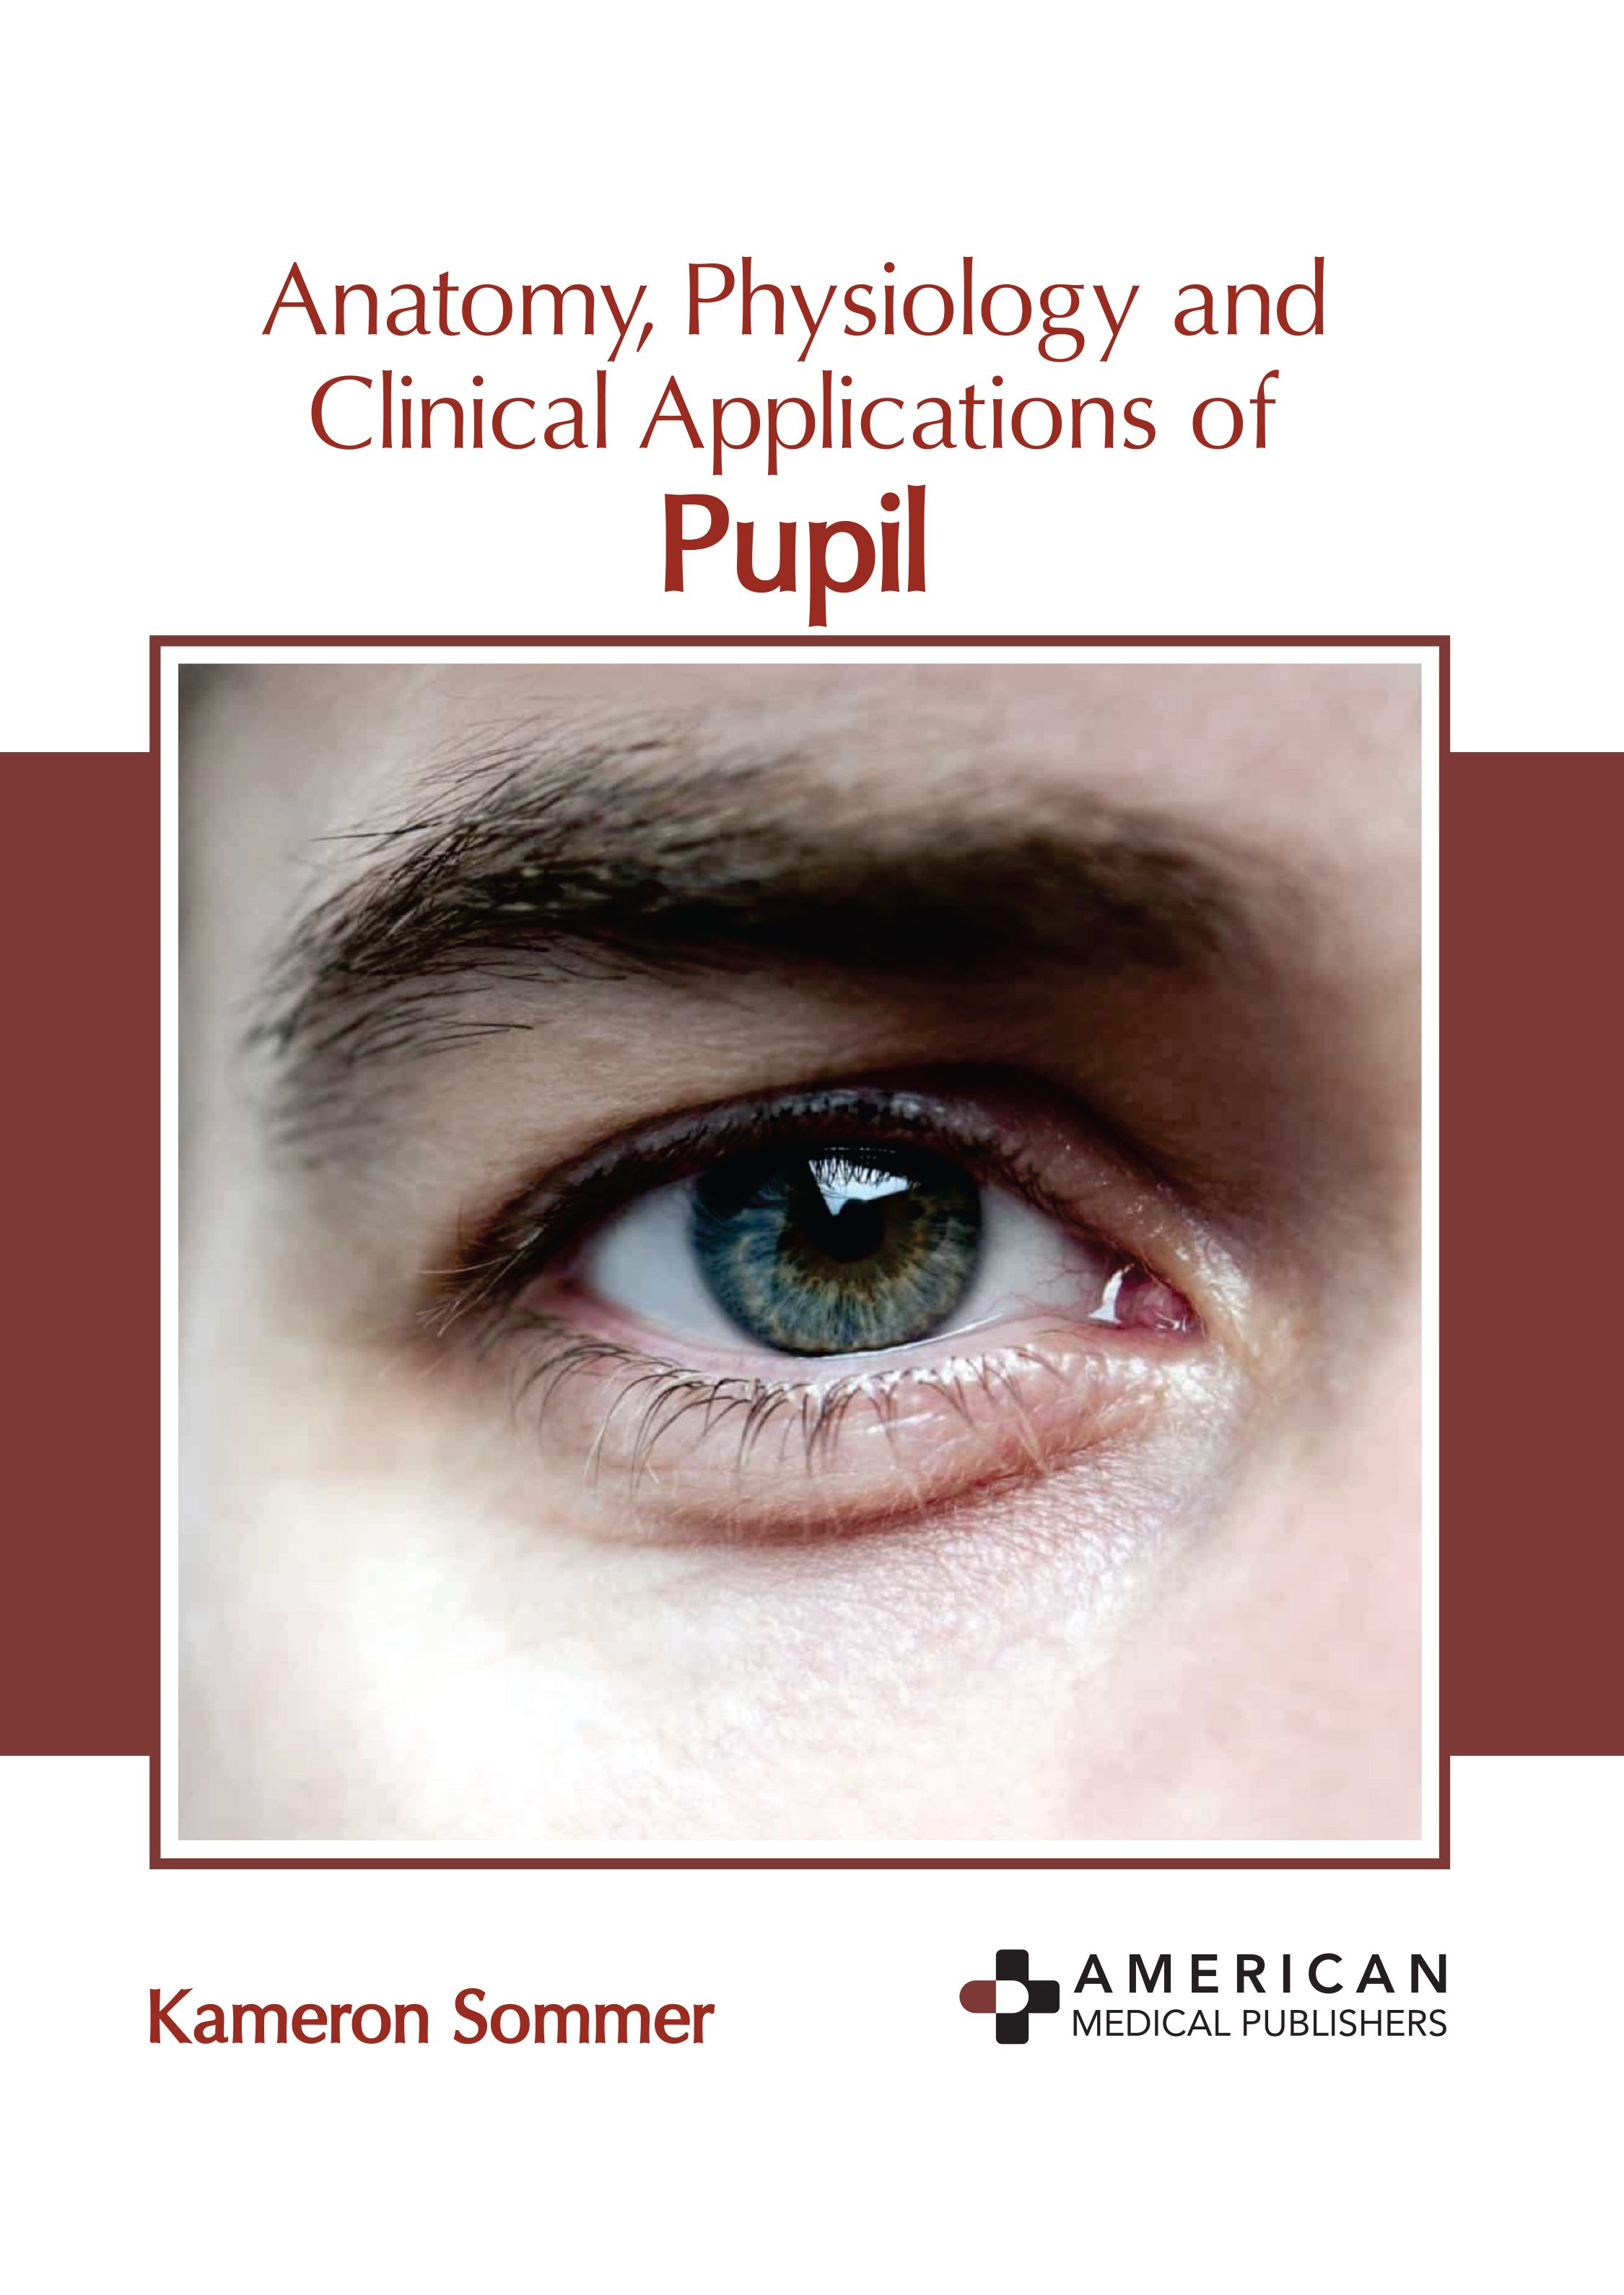 ANATOMY, PHYSIOLOGY AND CLINICAL APPLICATIONS OF PUPIL